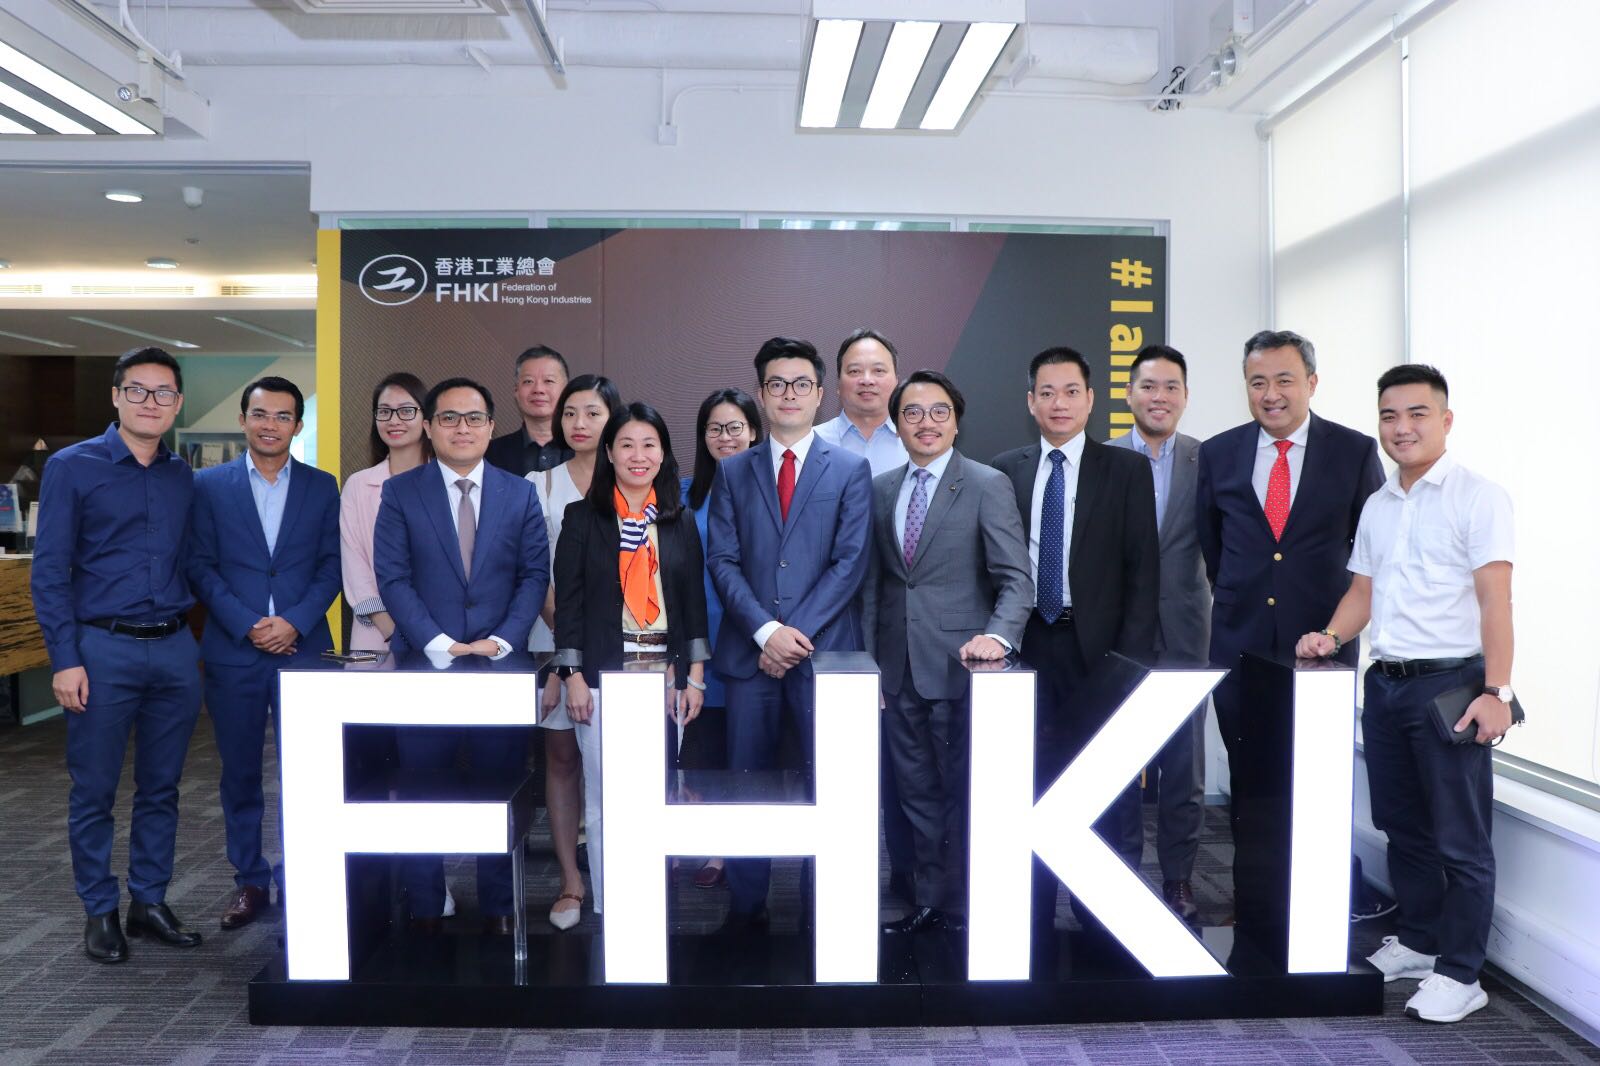 The delegation of IPA Vietnam visited and worked with the Federation of Hong Kong Industries